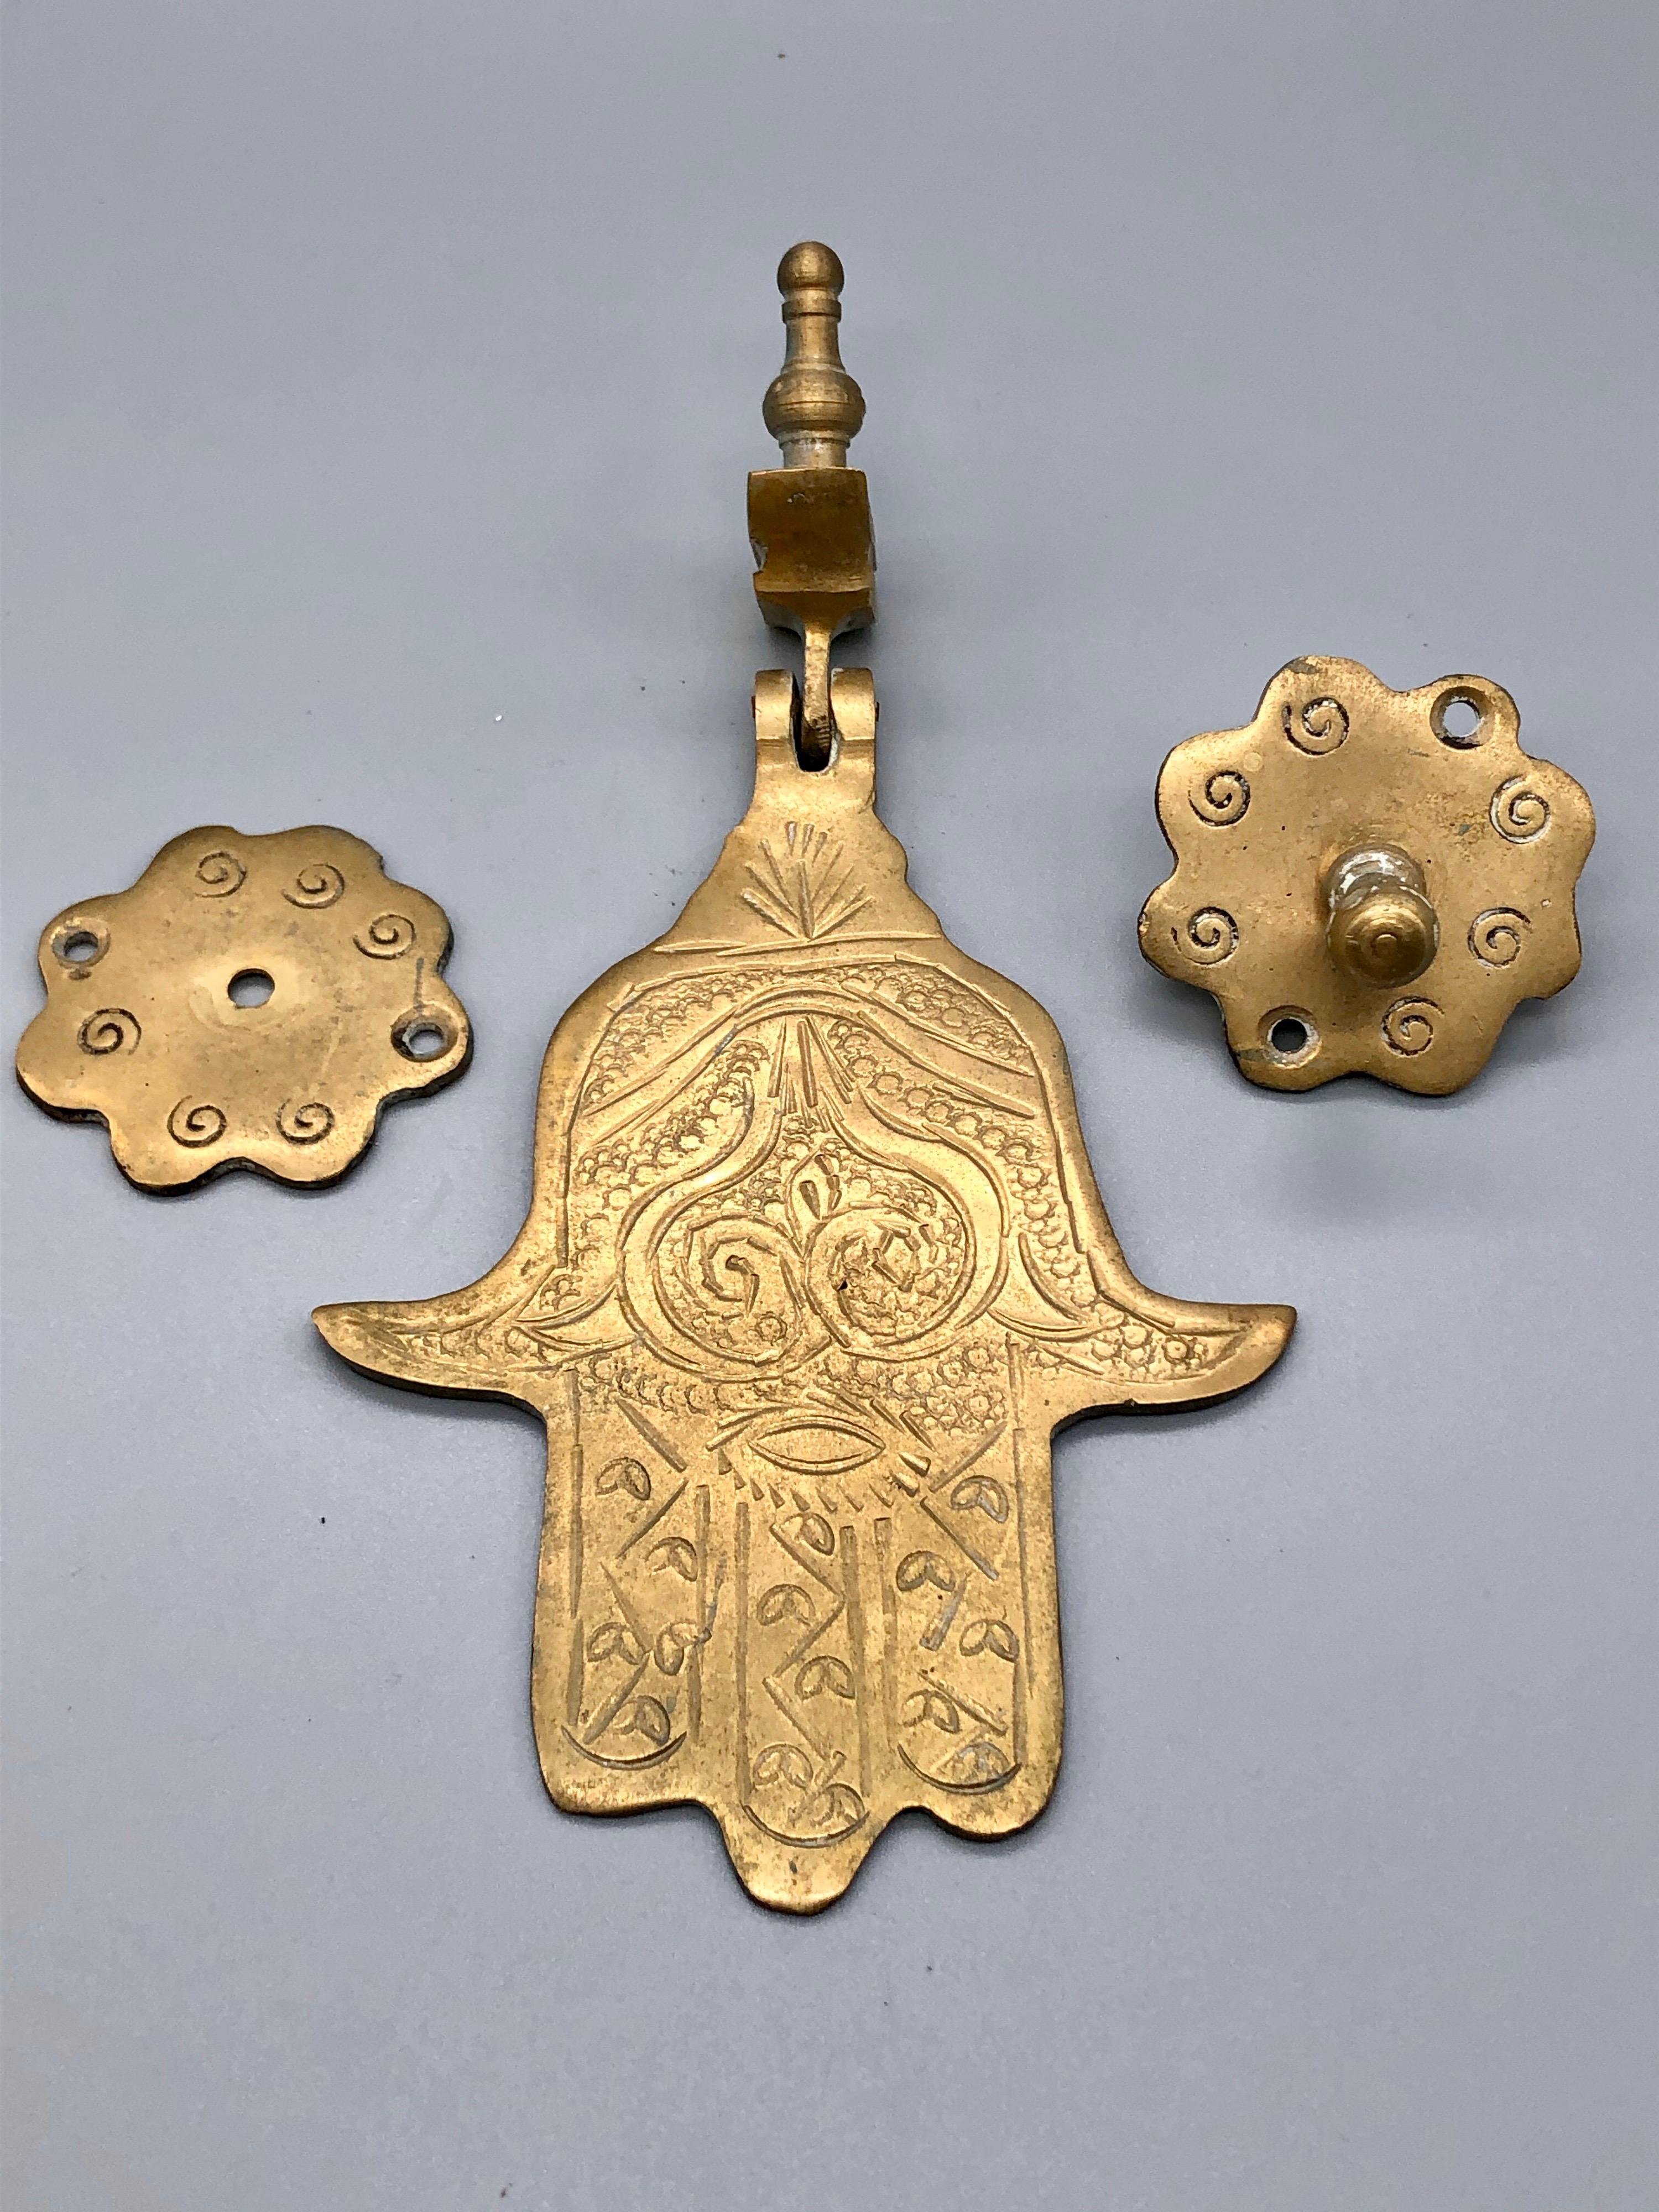 Handcut vintage brass Hamsa from Morocco circa 1950. Hand-engraved with traditional Berber symbols: tree of life, Sahara desert tent, evil eye, spiral of life. 

Affixes to door using included hardware. For thicker doors a larger screw can be